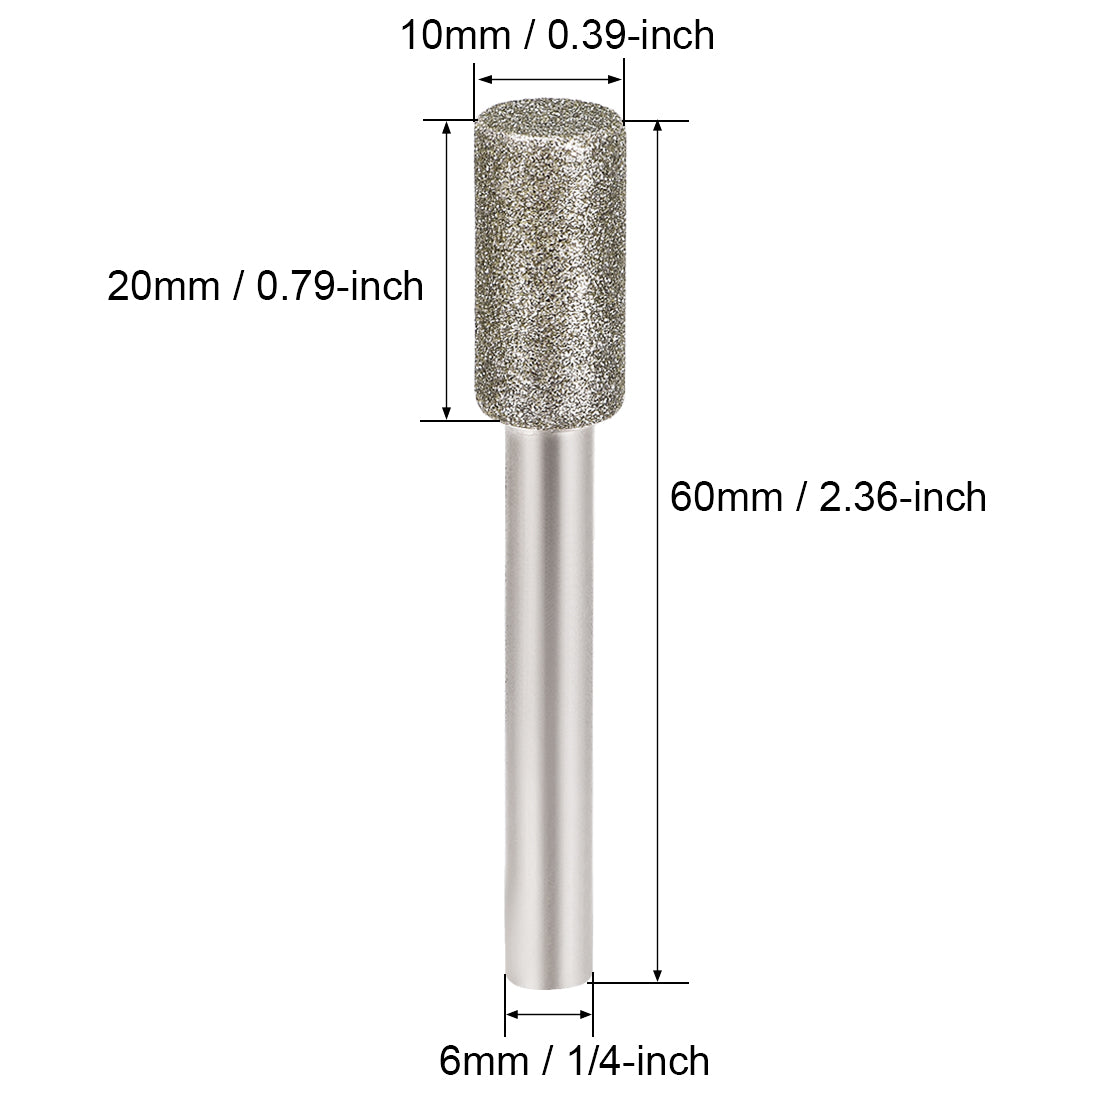 Uxcell Uxcell Diamond Burrs Grinding Drill Bits for Carving Rotary Tool 1/4-Inch Shank 10mm Cylindrical 150 Grit 2 Pcs